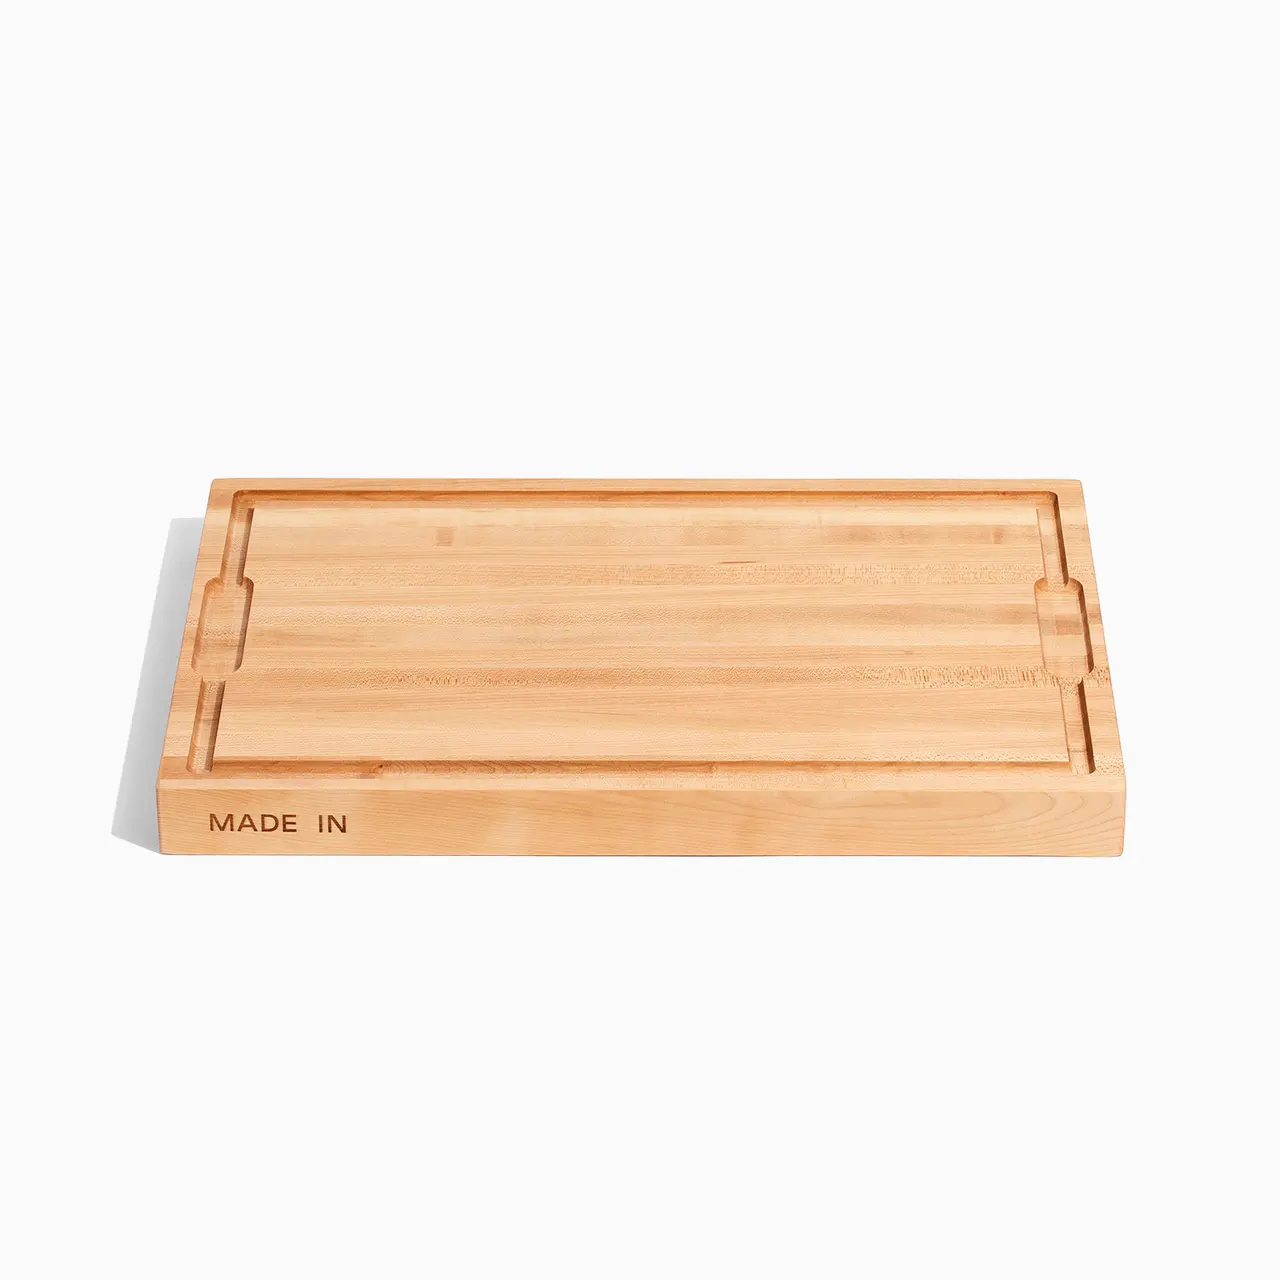 A rectangular bamboo cutting board with a juice groove on the perimeter and the words "MADE IN" inscribed on one side.